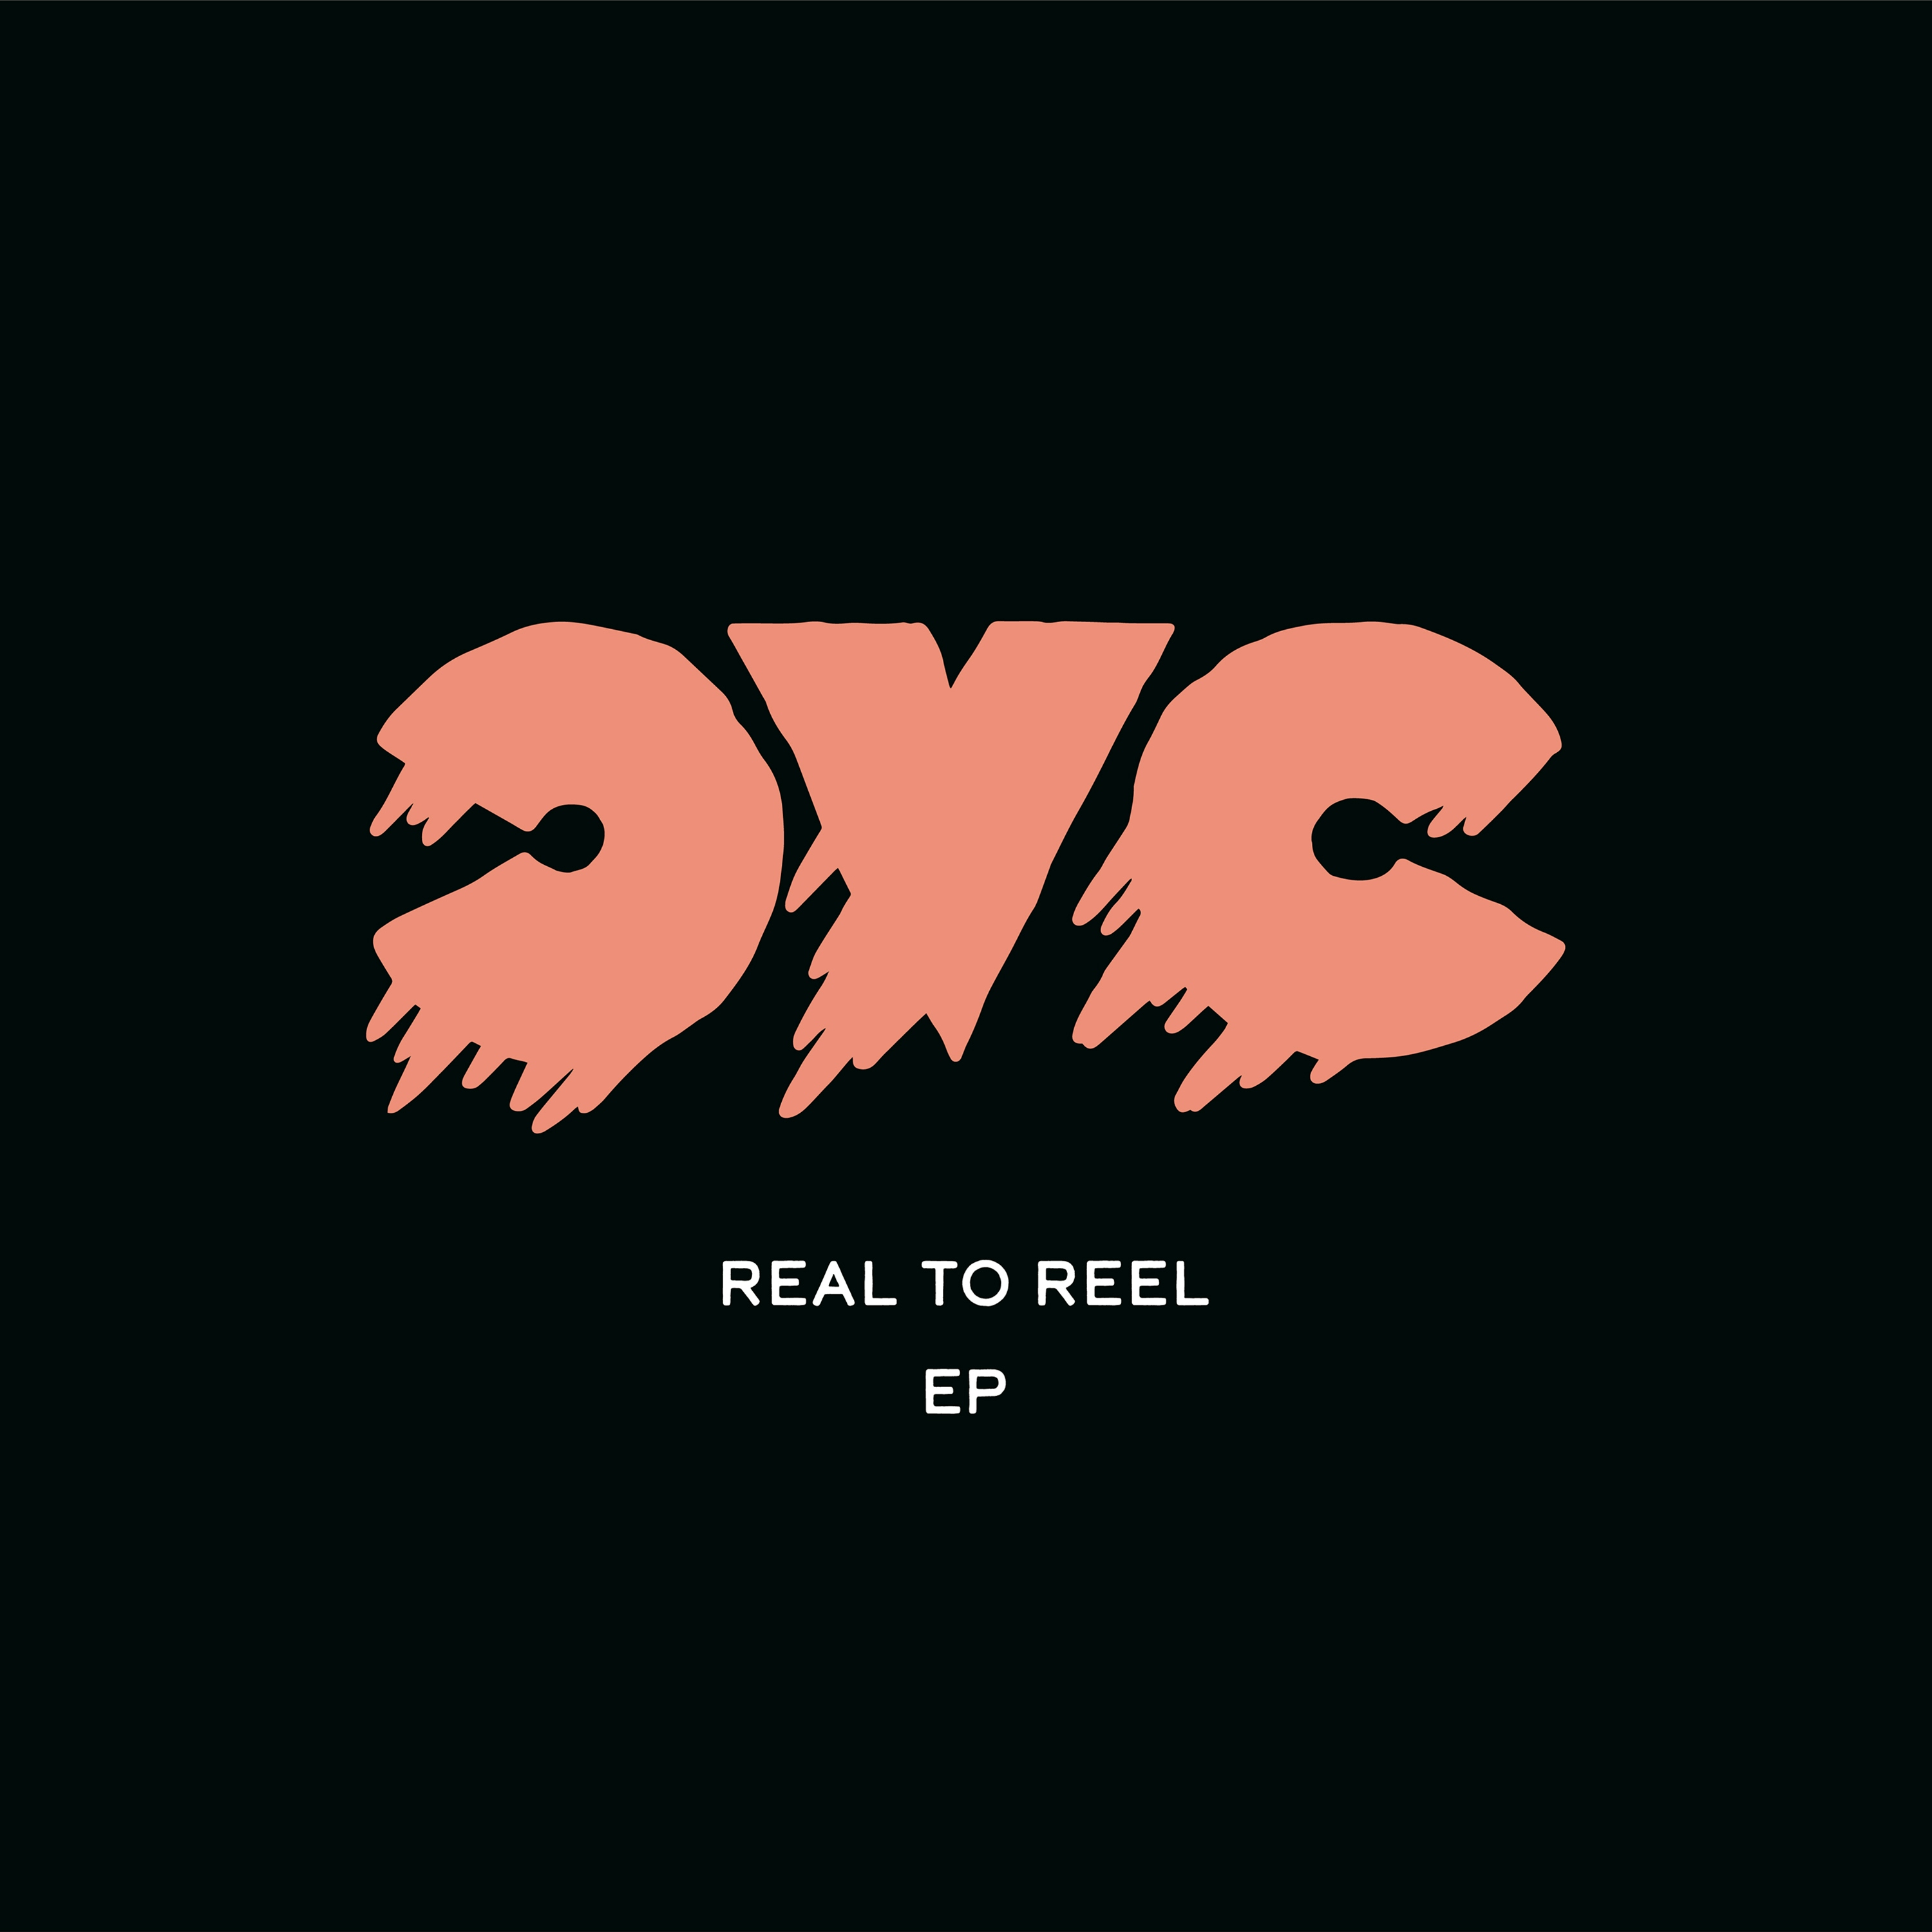 Album artwork for Album artwork for Real to Reel EP by CVC by Real to Reel EP - CVC